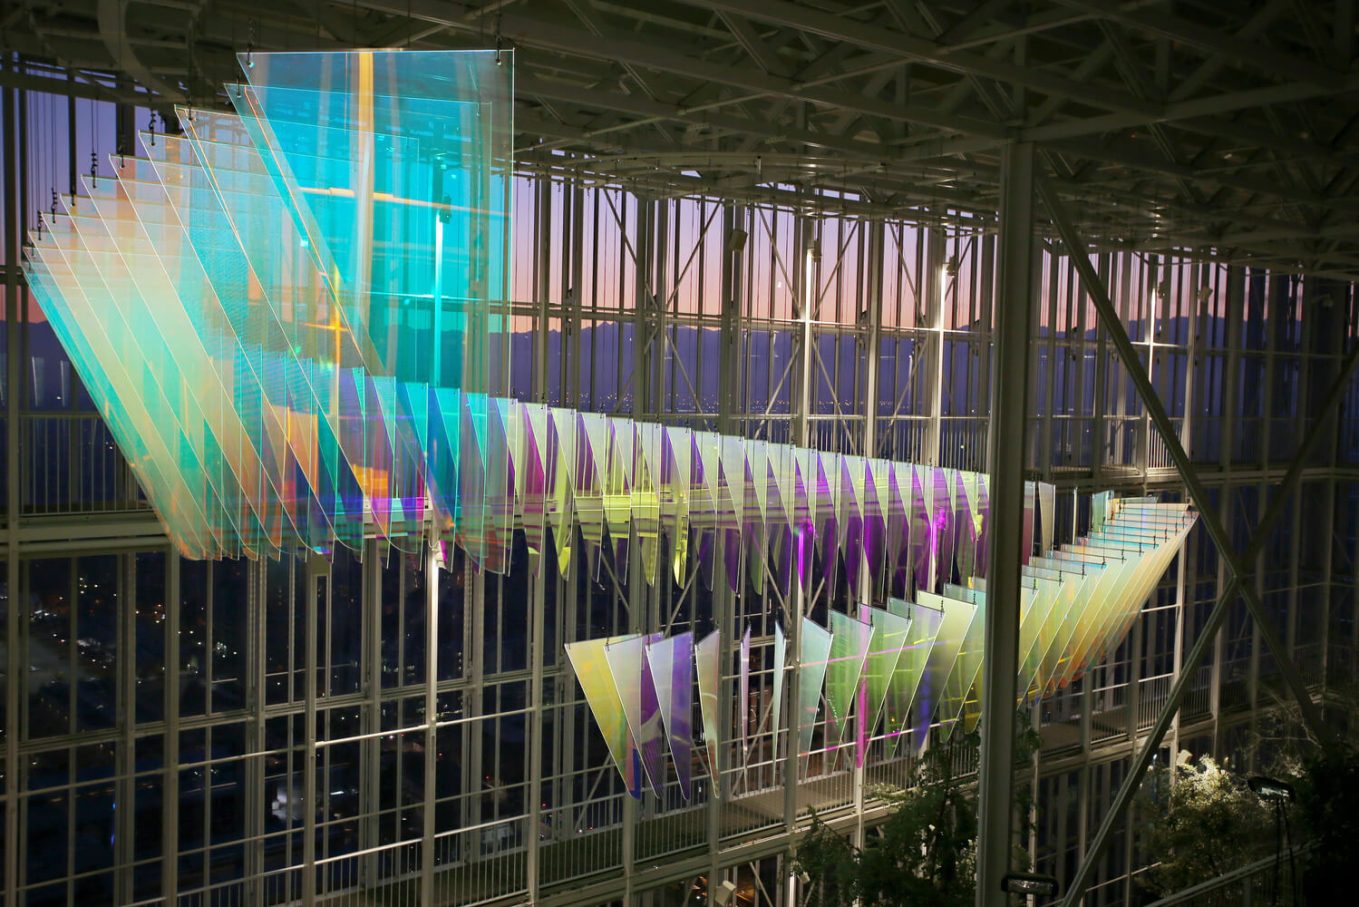 3M iridescent window film was used in this skyscraper display in Turin, Italy, where triangular pieces of glass hung from the ceiling in the shape of an alpha symbol.